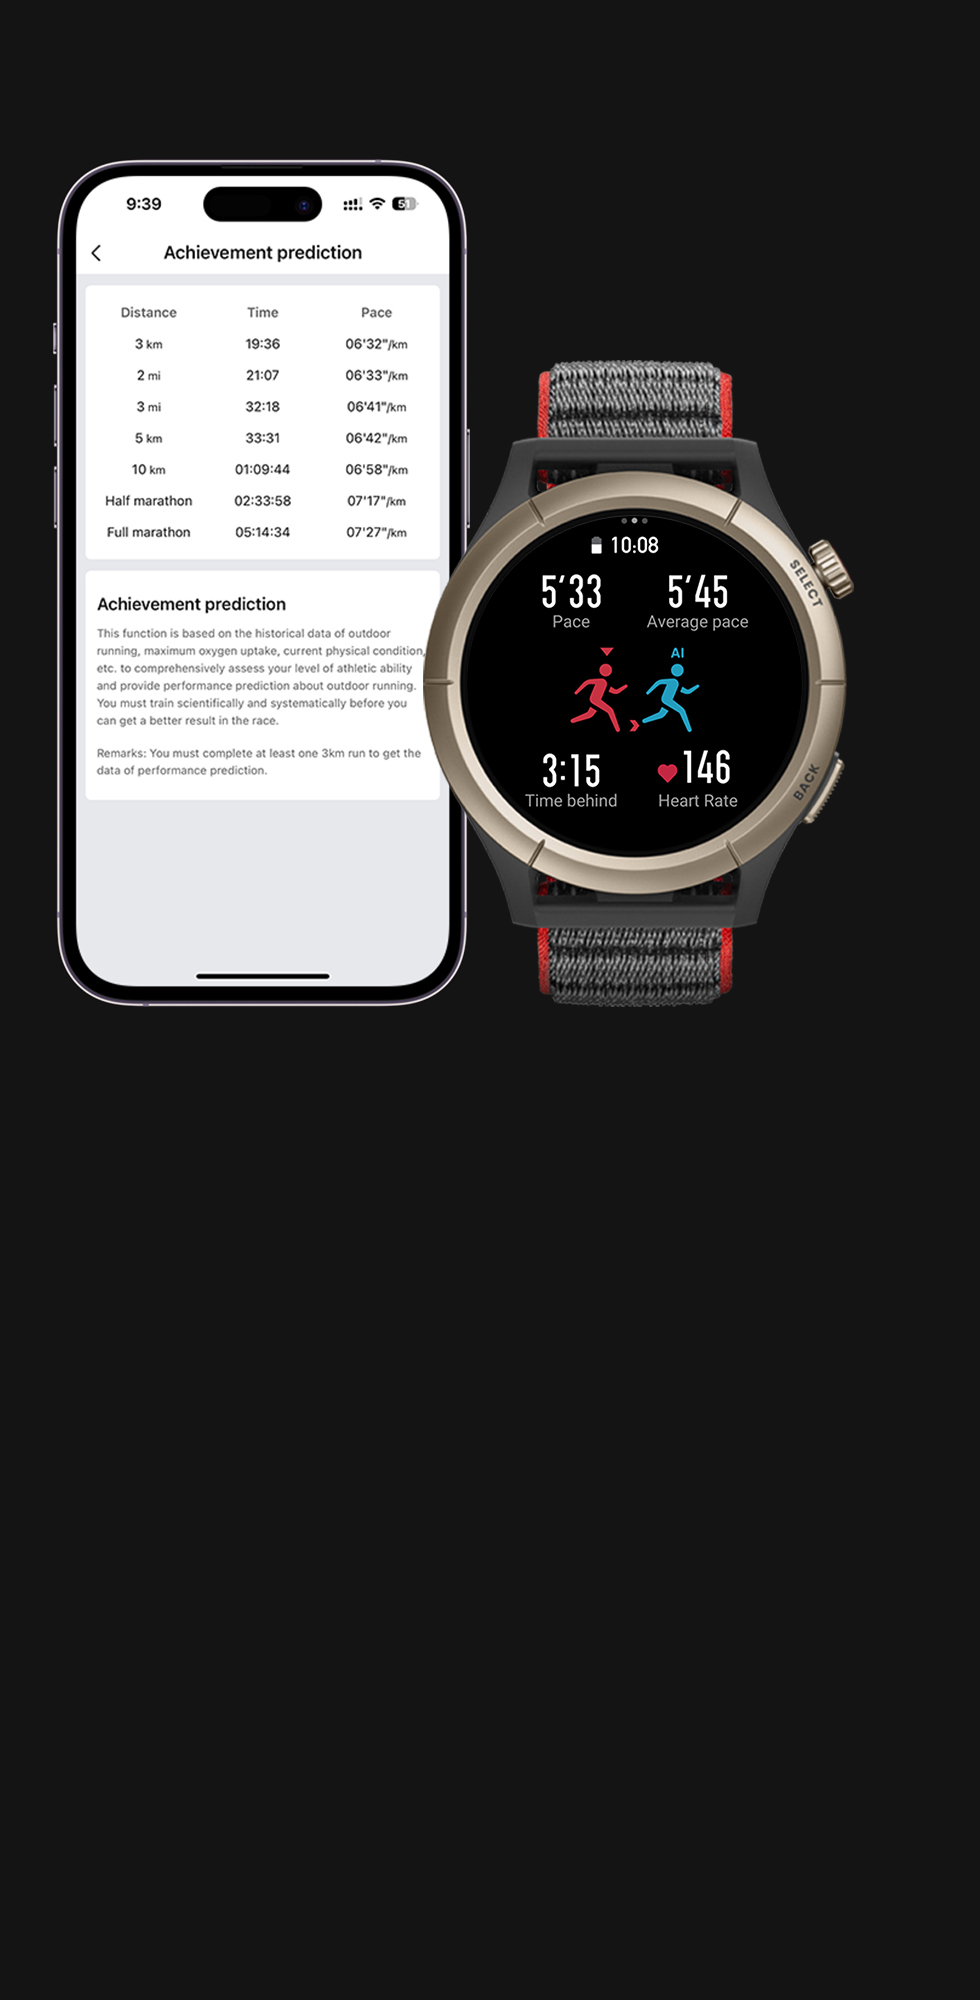 Amazfit Cheetah Pro, Premium running partner that helps you plan, train,  and recover smarter